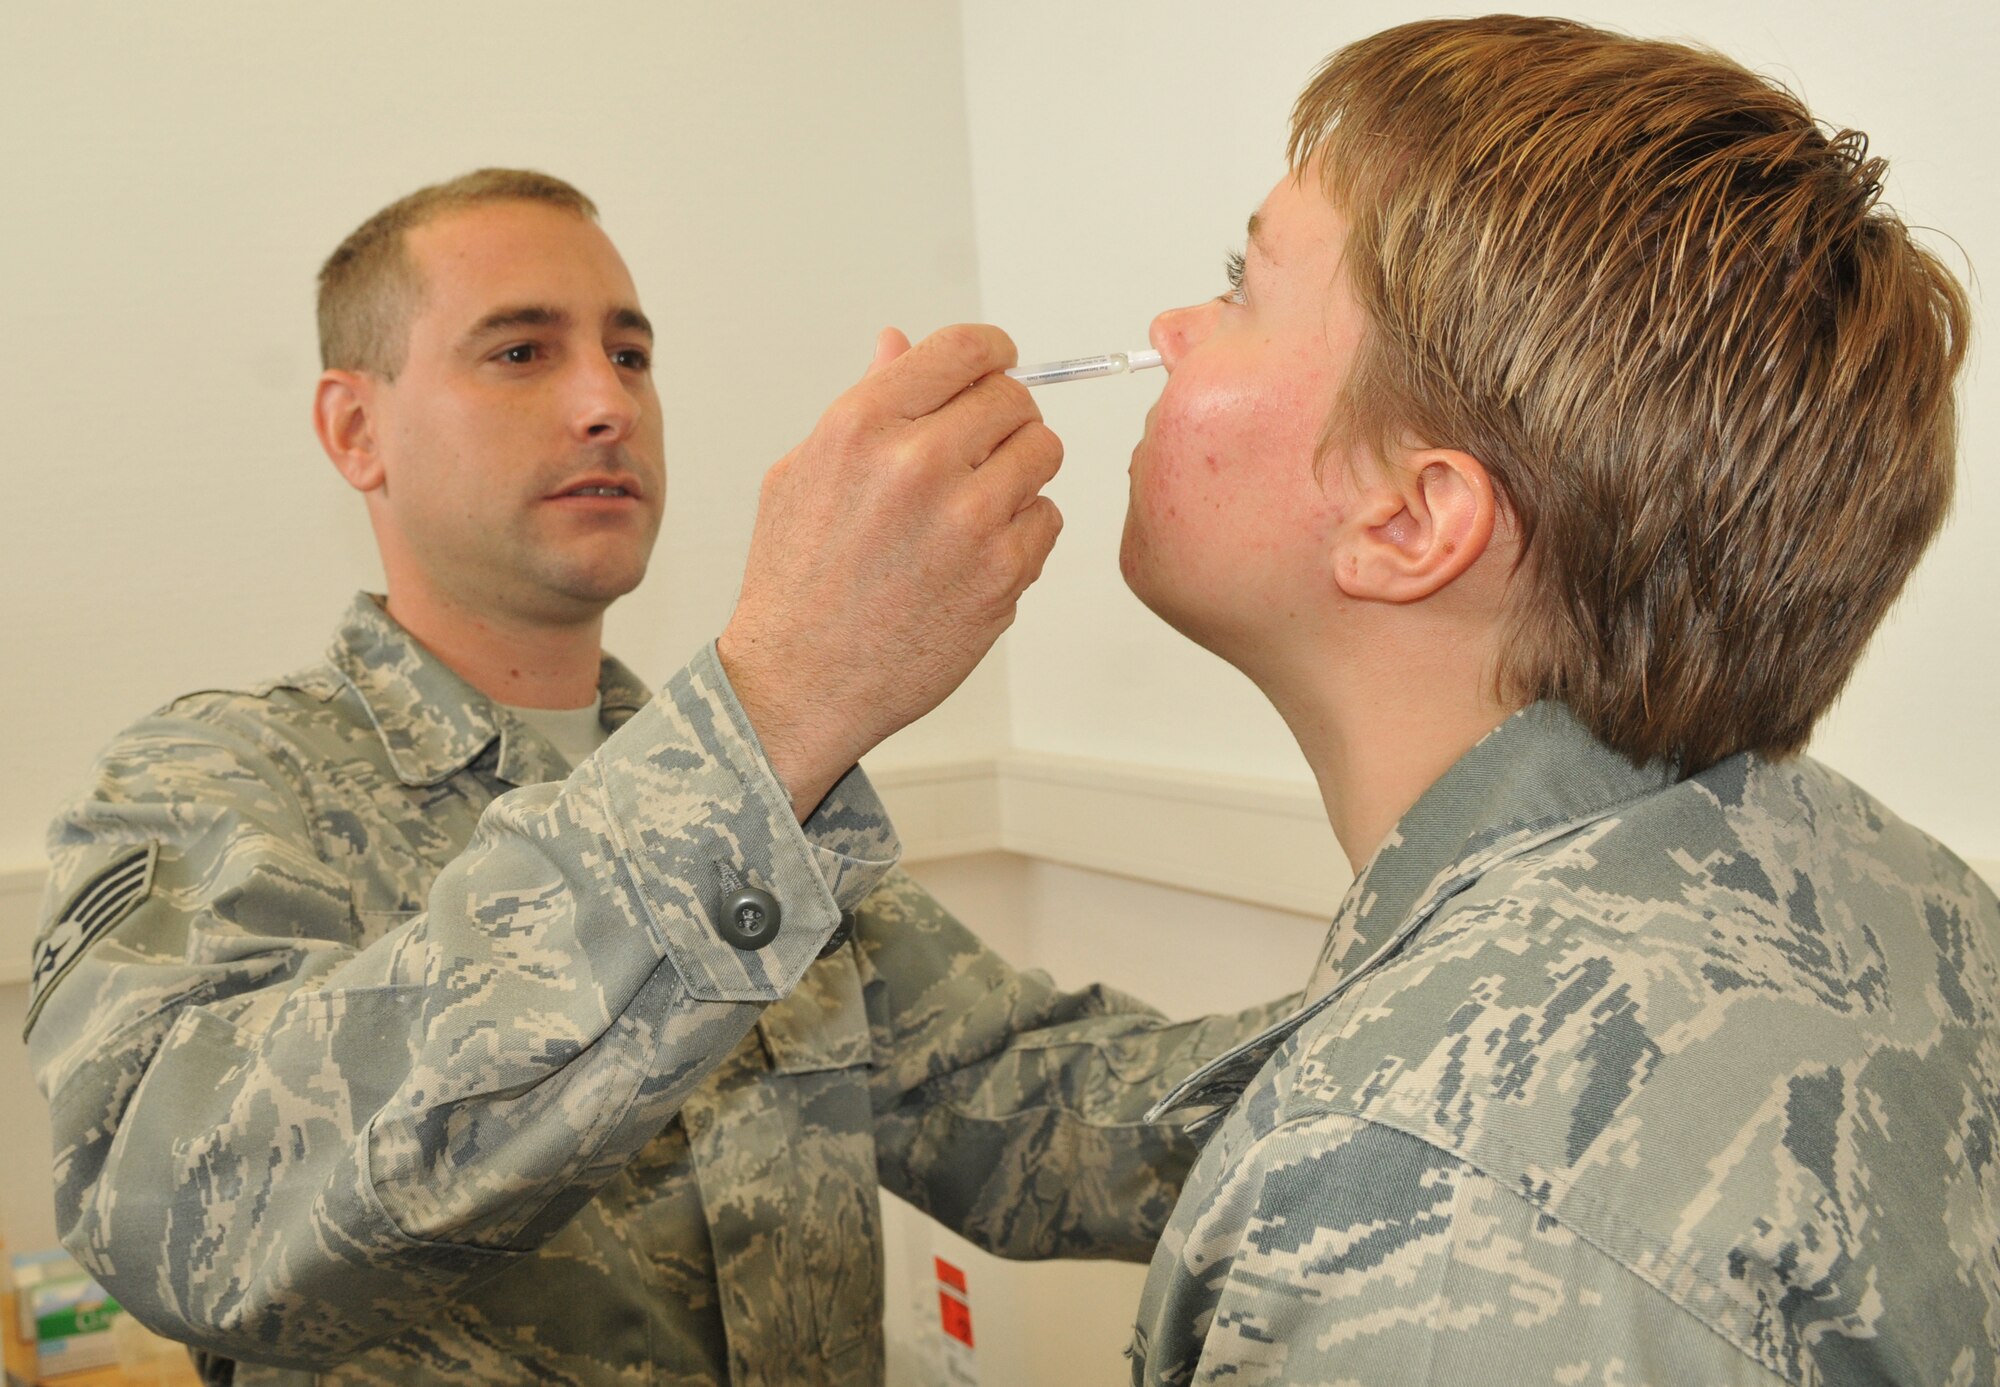 SPANGDAHLEM AIR BASE, Germany -- Staff Sgt. Brian Schmit, 52nd Medical Operations Squadron, gives a flu mist vaccination to Airman 1st Class Samantha Draves, 52nd Civil Engineer Squadron, Sept. 29 at a mass flu vaccination at building 103. The vaccines provided to Sabers included immunization for three common flu strains. The H1N1 influenza strain was not among those; however, a vaccine for this is expected to seen in the near future.  For people who didn’t get the flu vaccination, immunizations will be given again 7 a.m. to 5 p.m. Oct 6-7 in building 103.  (U.S. Air Force photo/Airman 1st Class Nick Wilson)